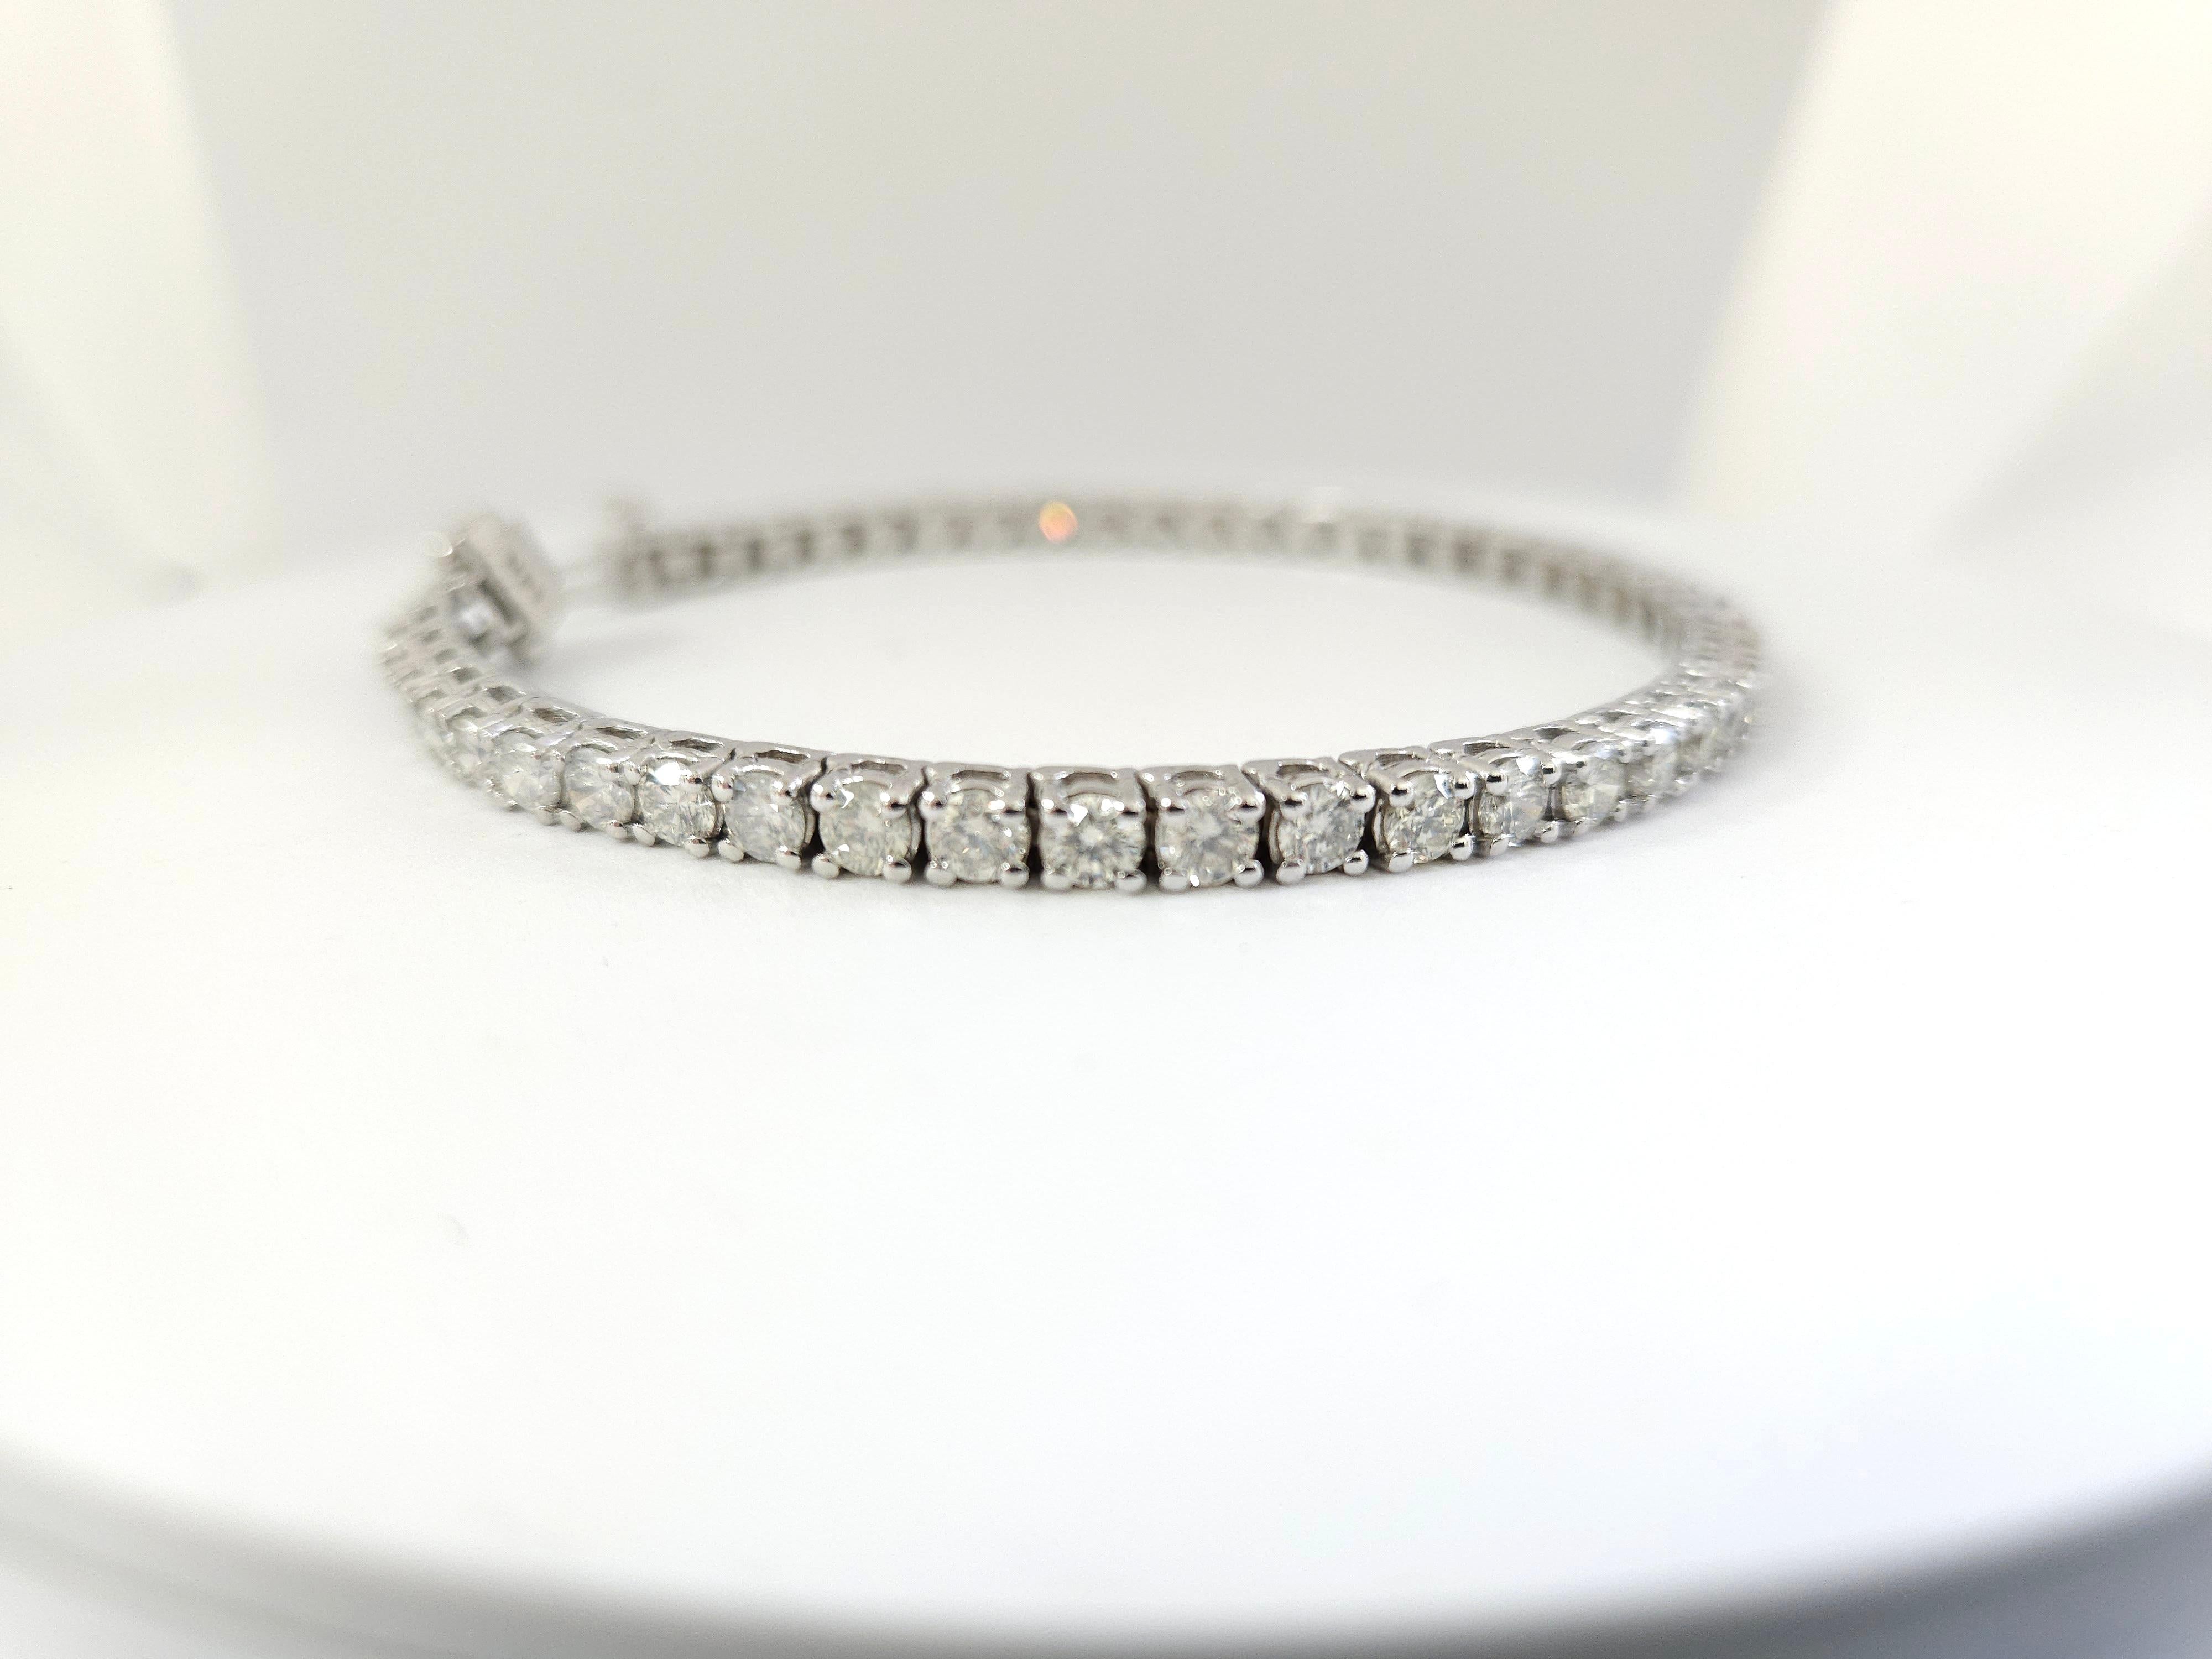 Natural diamonds tennis bracelet round-brilliant cut  14k white gold. 
7 inch. Average Color H, Clarity SI 3.70 mm wide,48 pcs, 14.06 grams very shiny 

*Free shipping within U.S*

